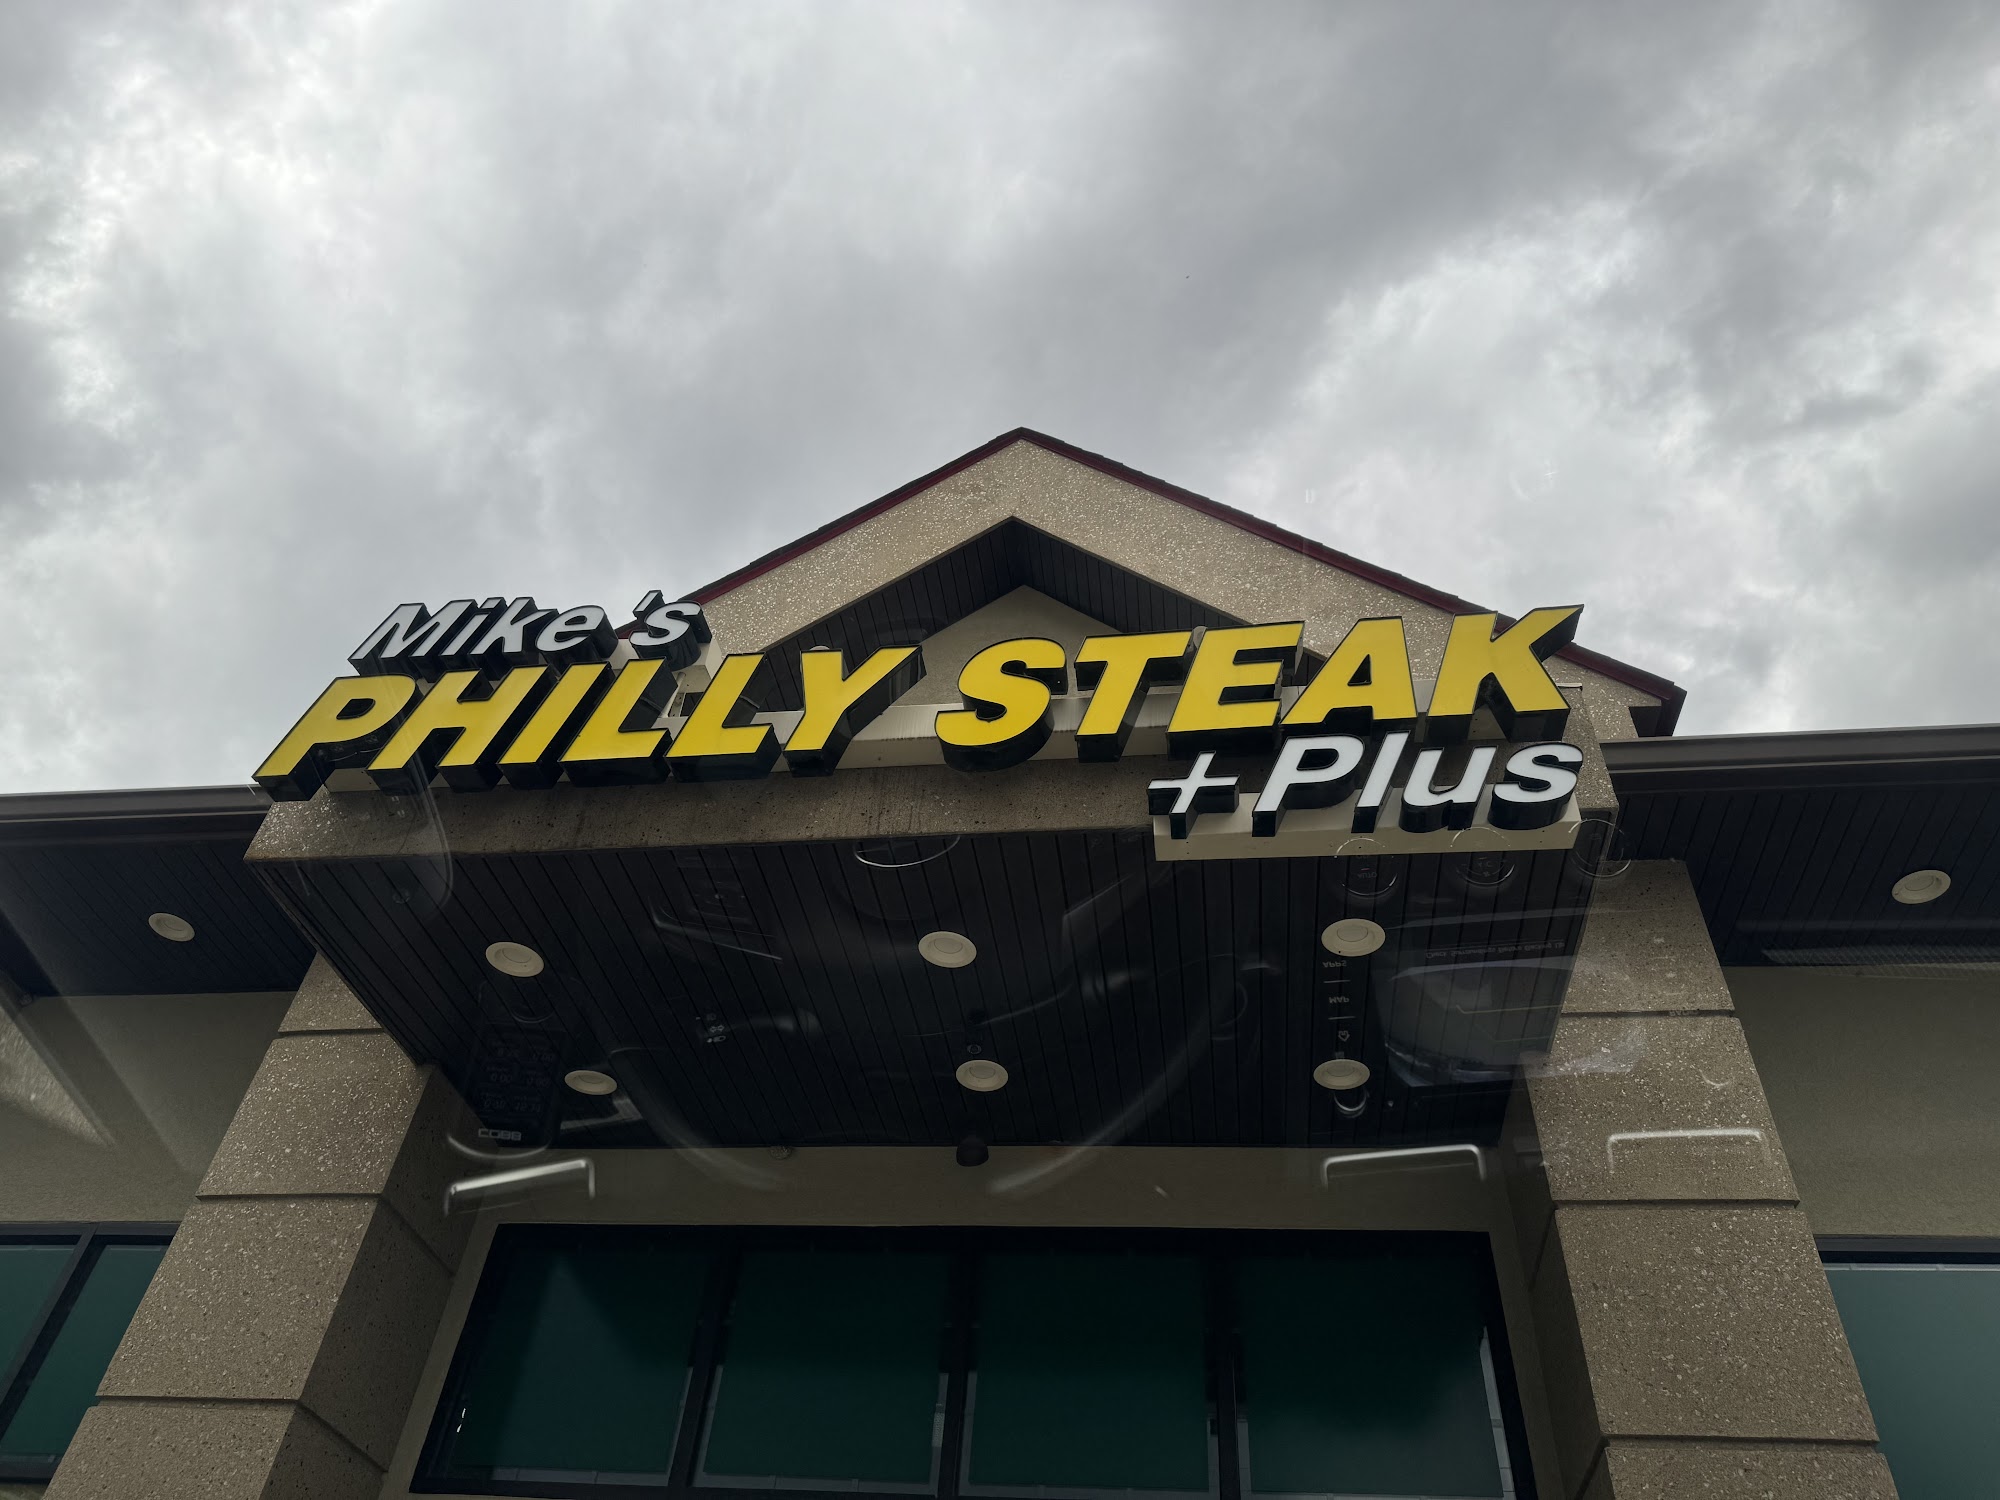 Mike's Philly Steak Plus